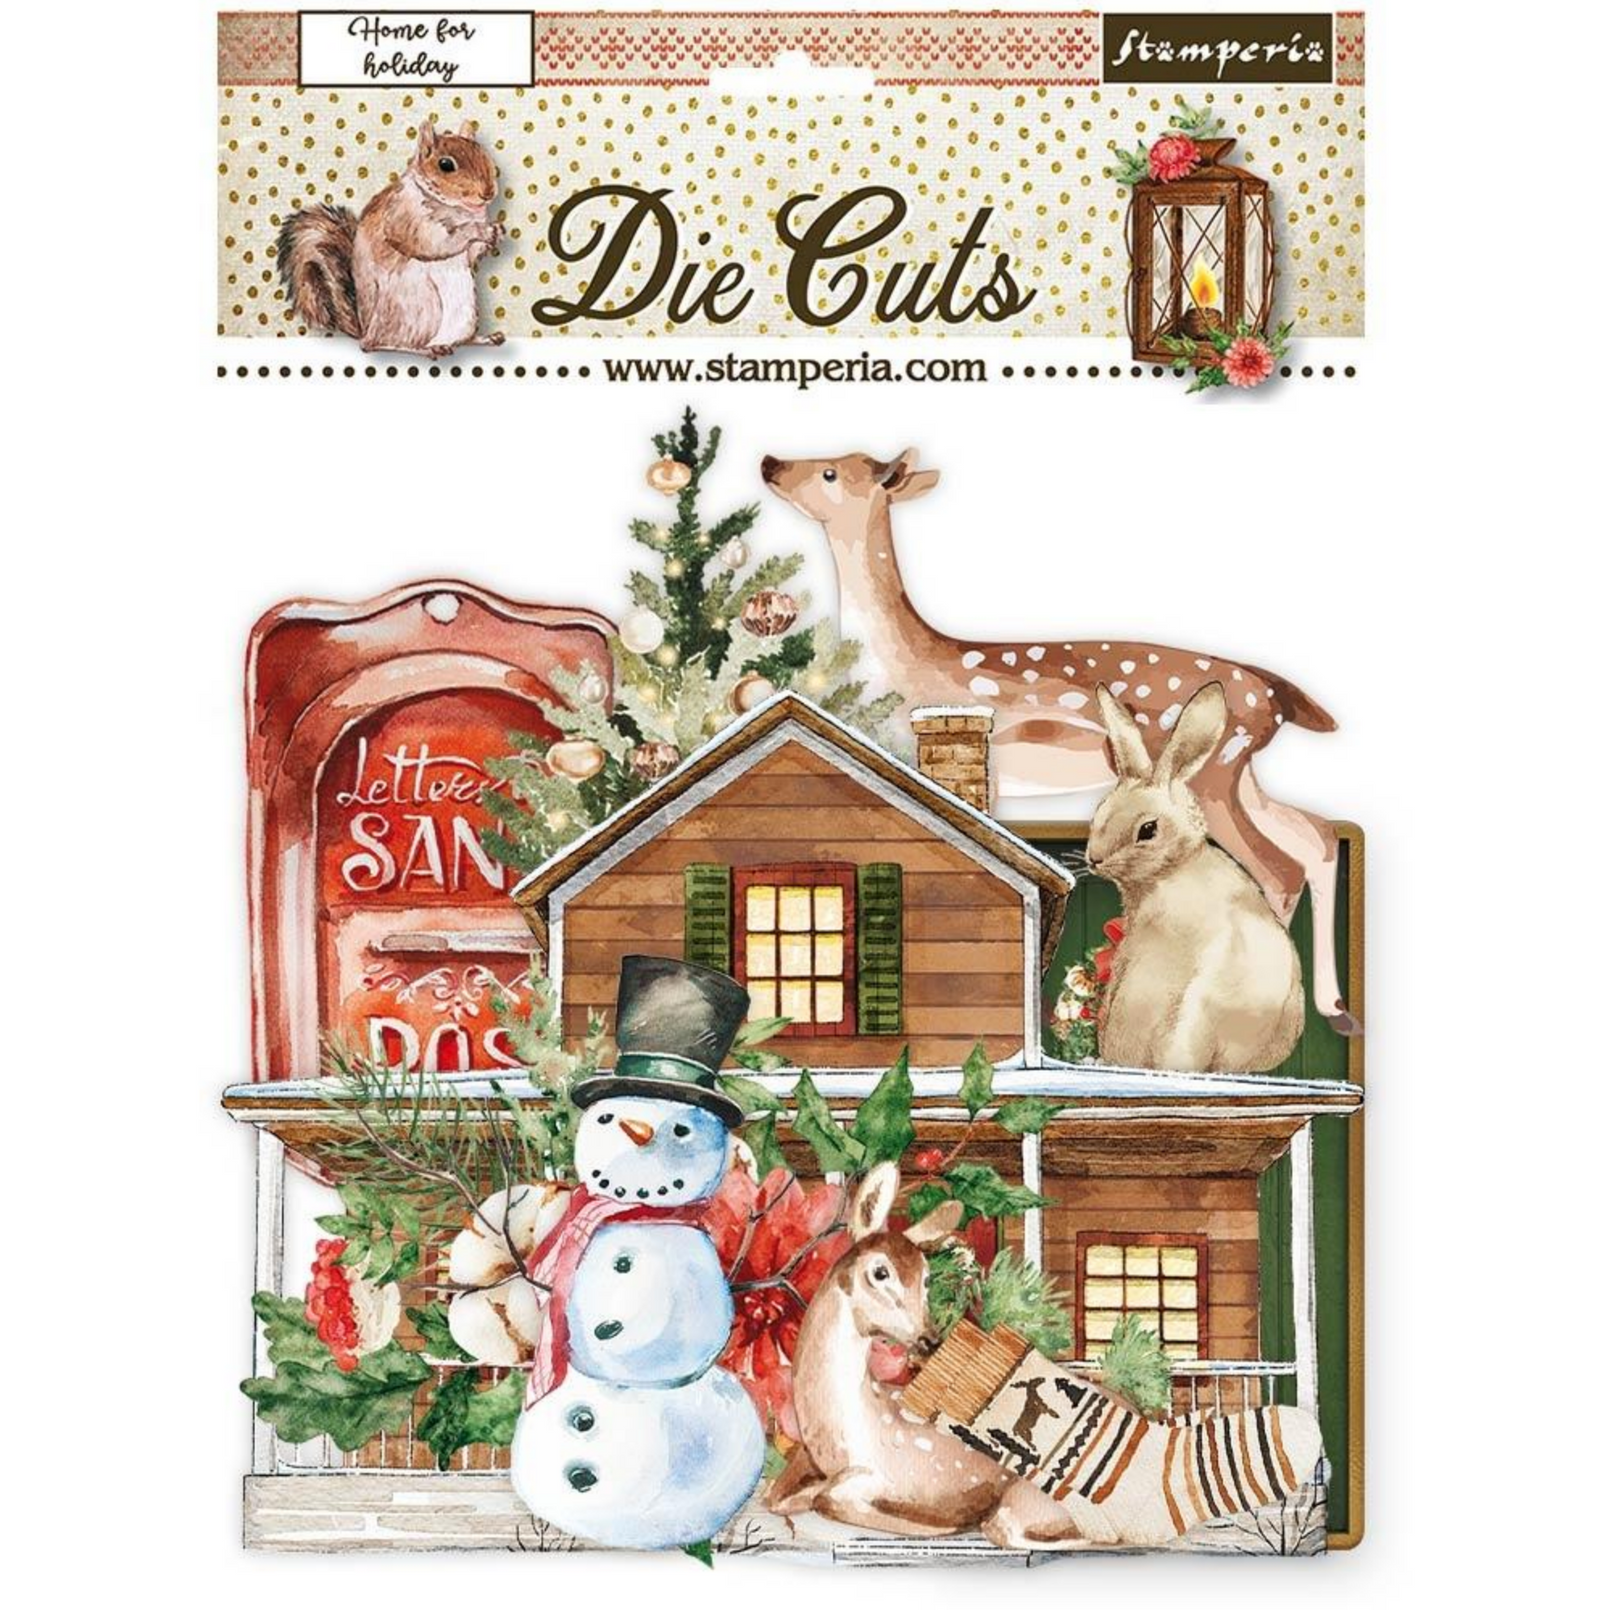 Home For The Holidays - Die Cuts - Stamperia